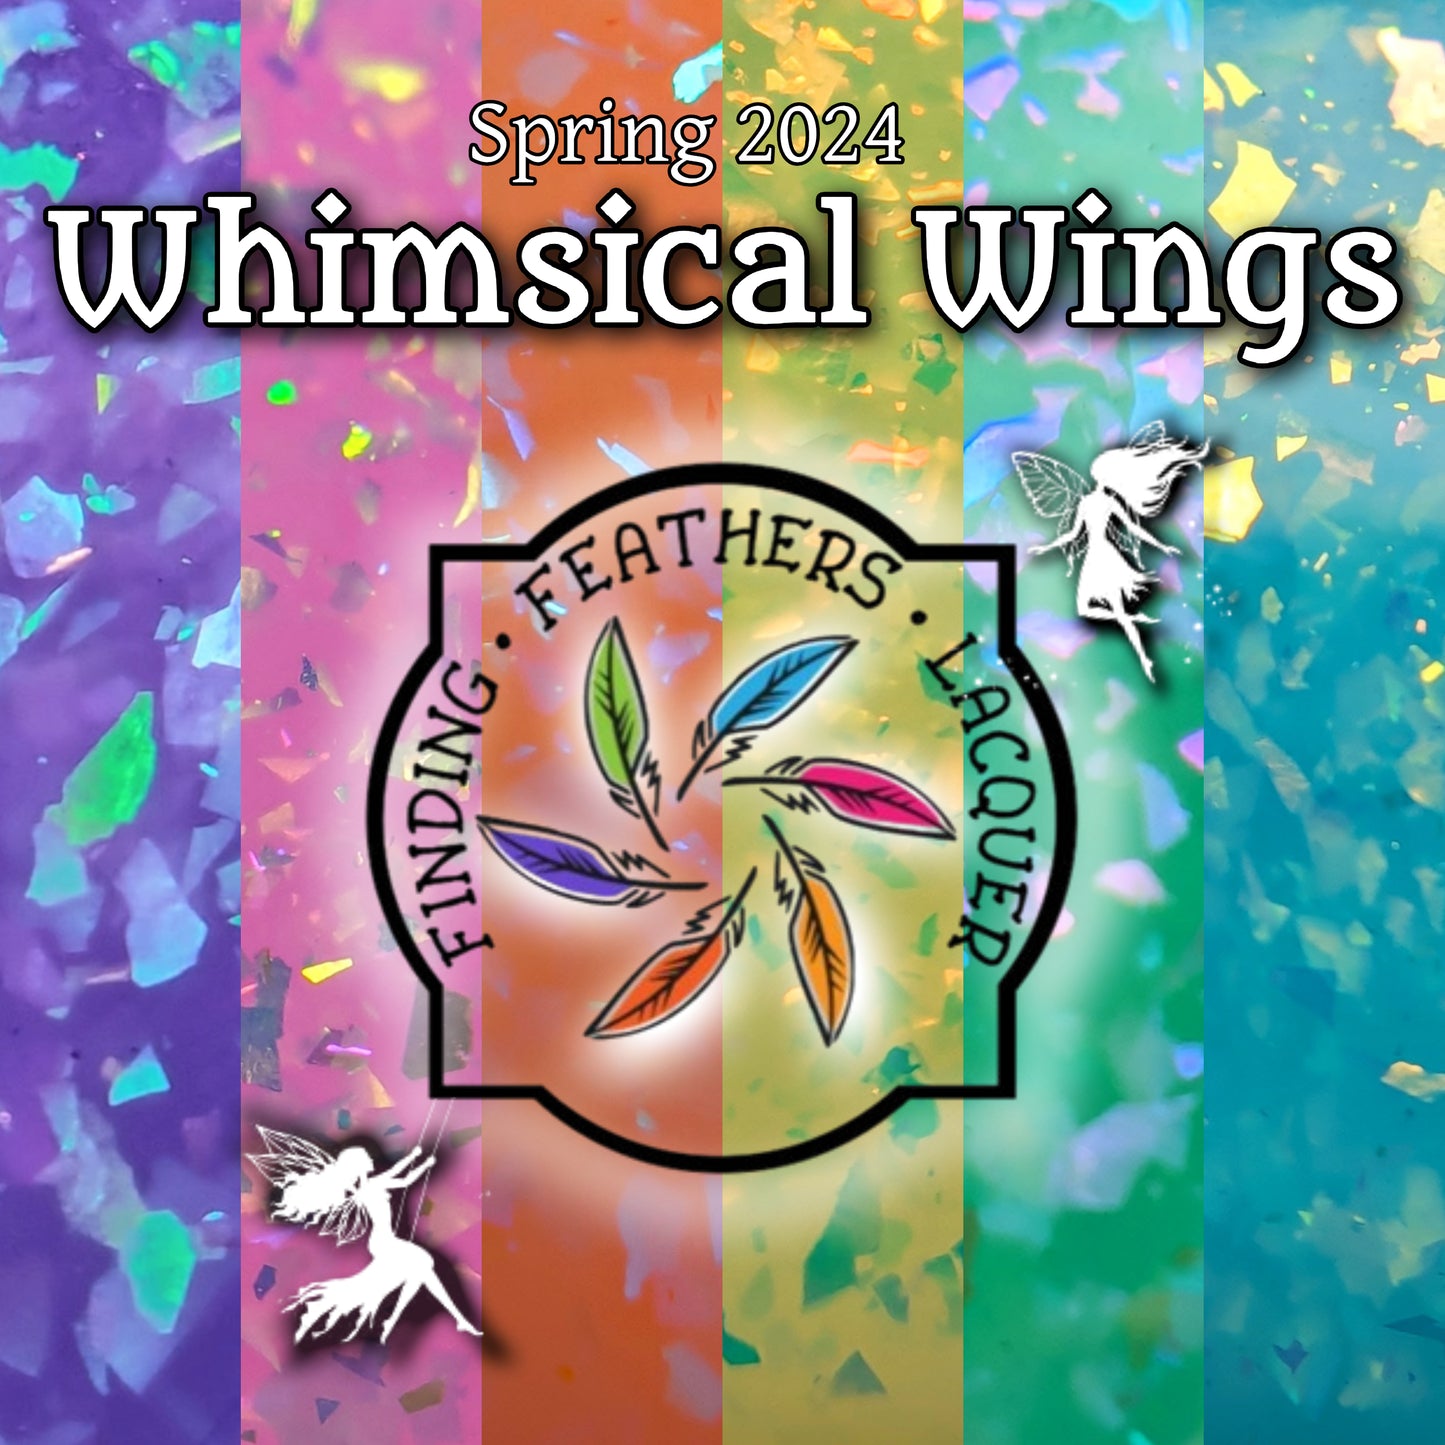 Full Whimsical Wings Collection